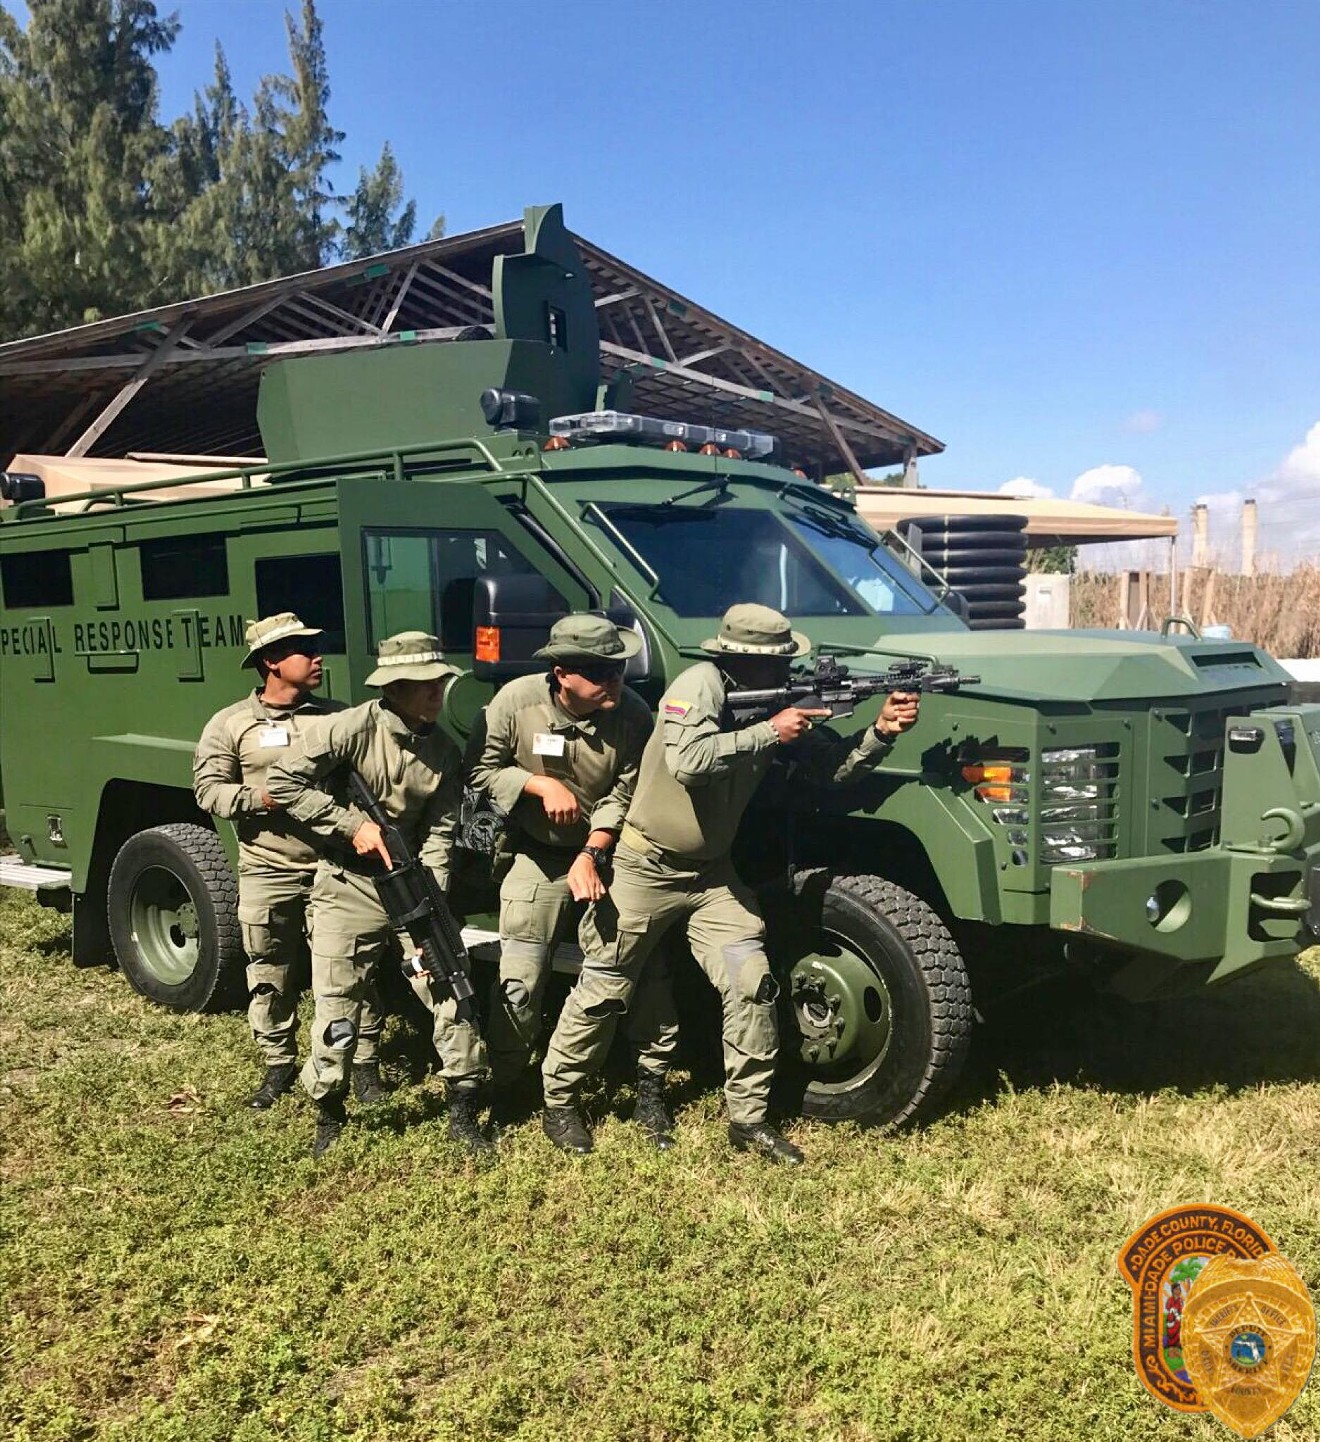 A truck like the one seen in the training exercise above will be deployed at random Miami-Dade County buildings from now on. (The officers in the photo above are not MDPD cops.)